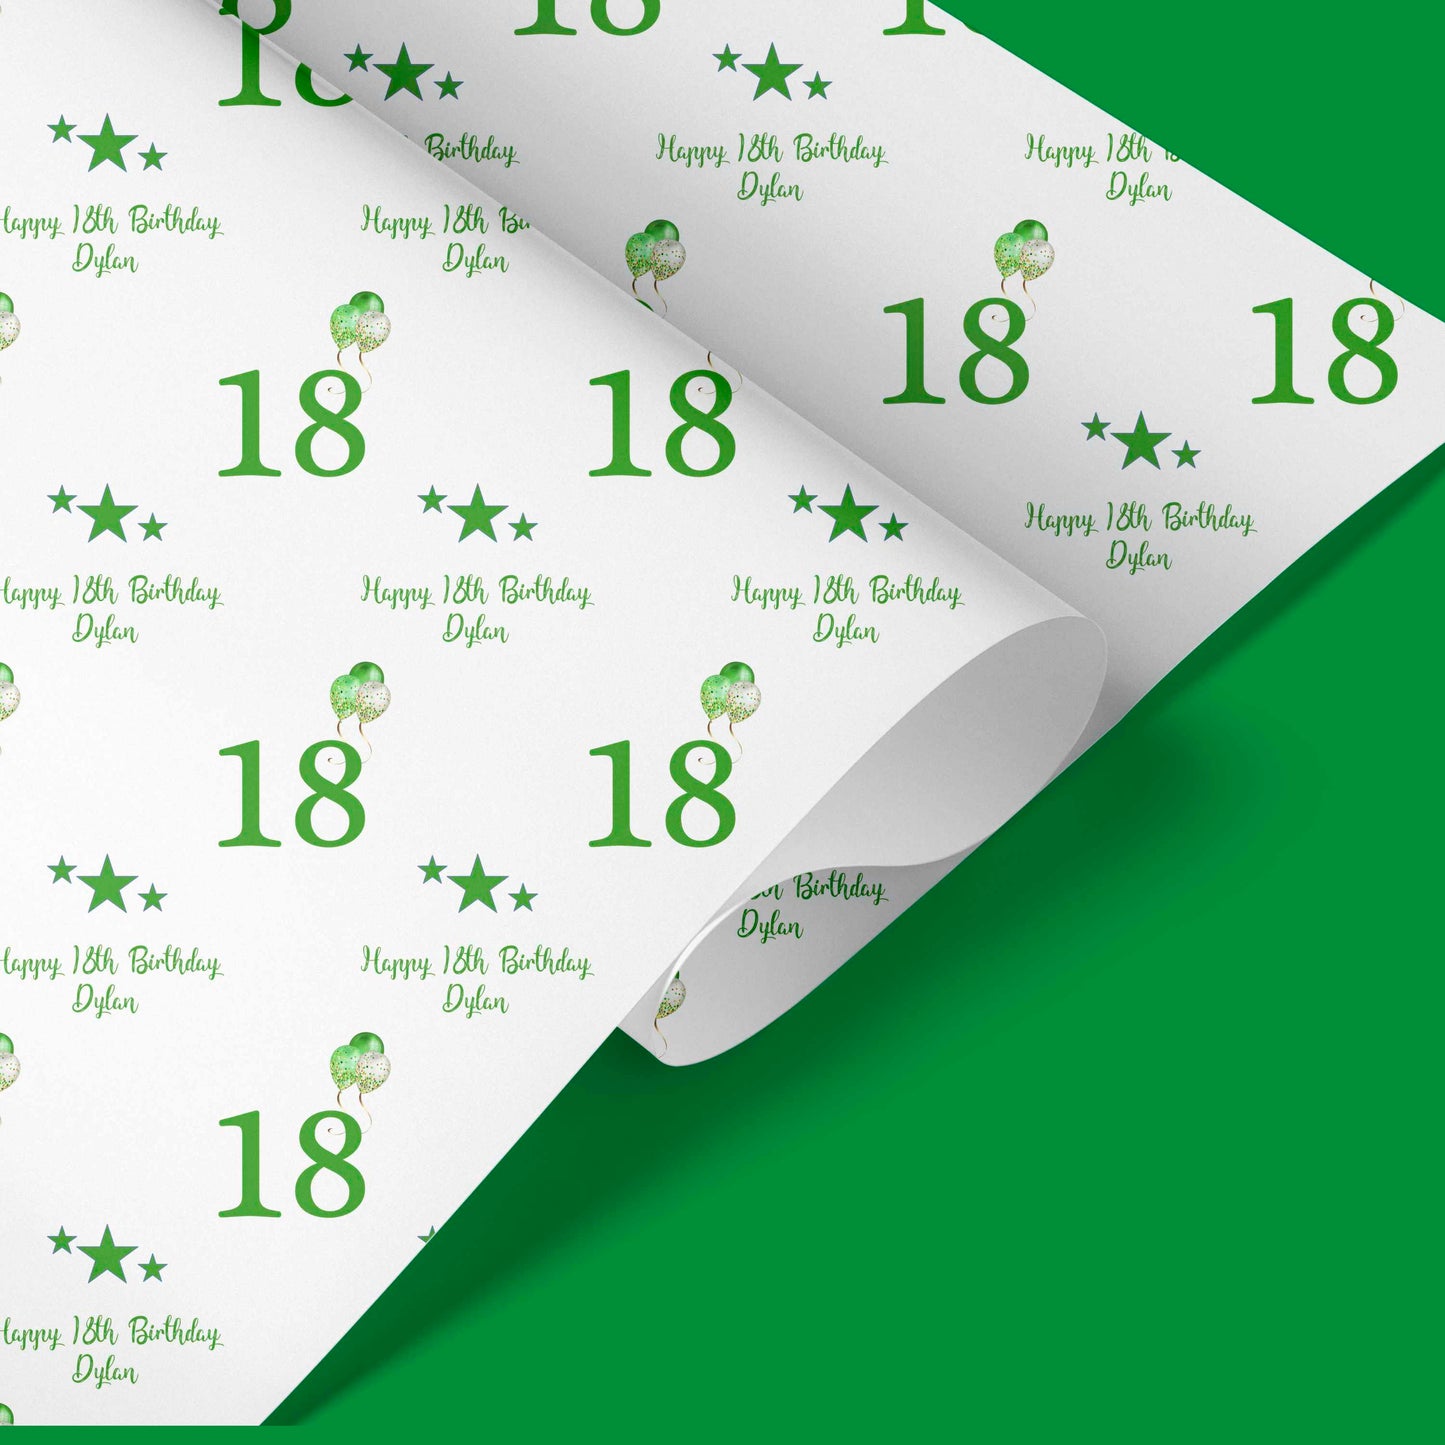 Personalised Birthday Wrapping Paper Green Balloons Stars